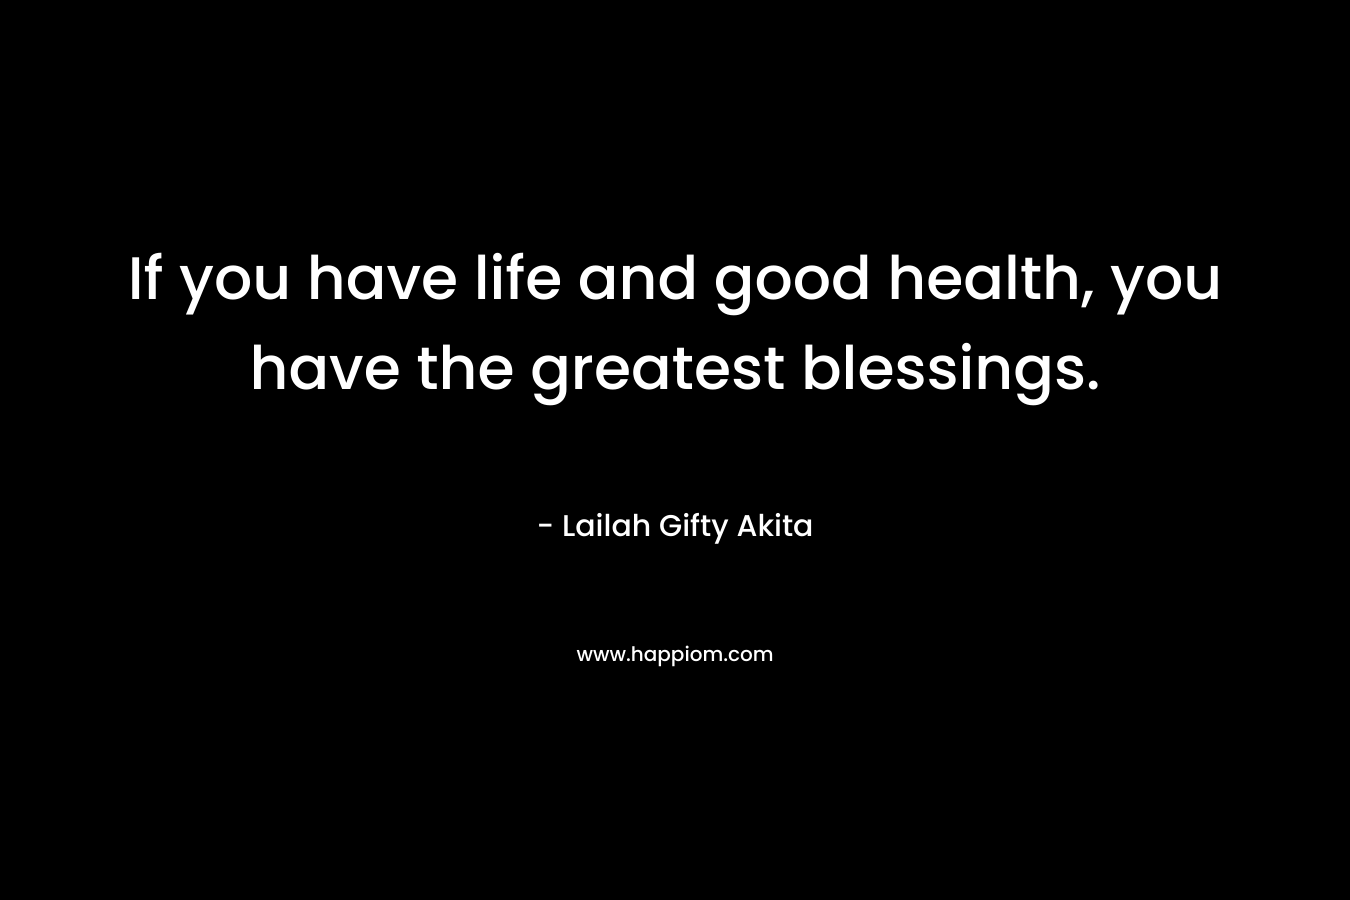 If you have life and good health, you have the greatest blessings.